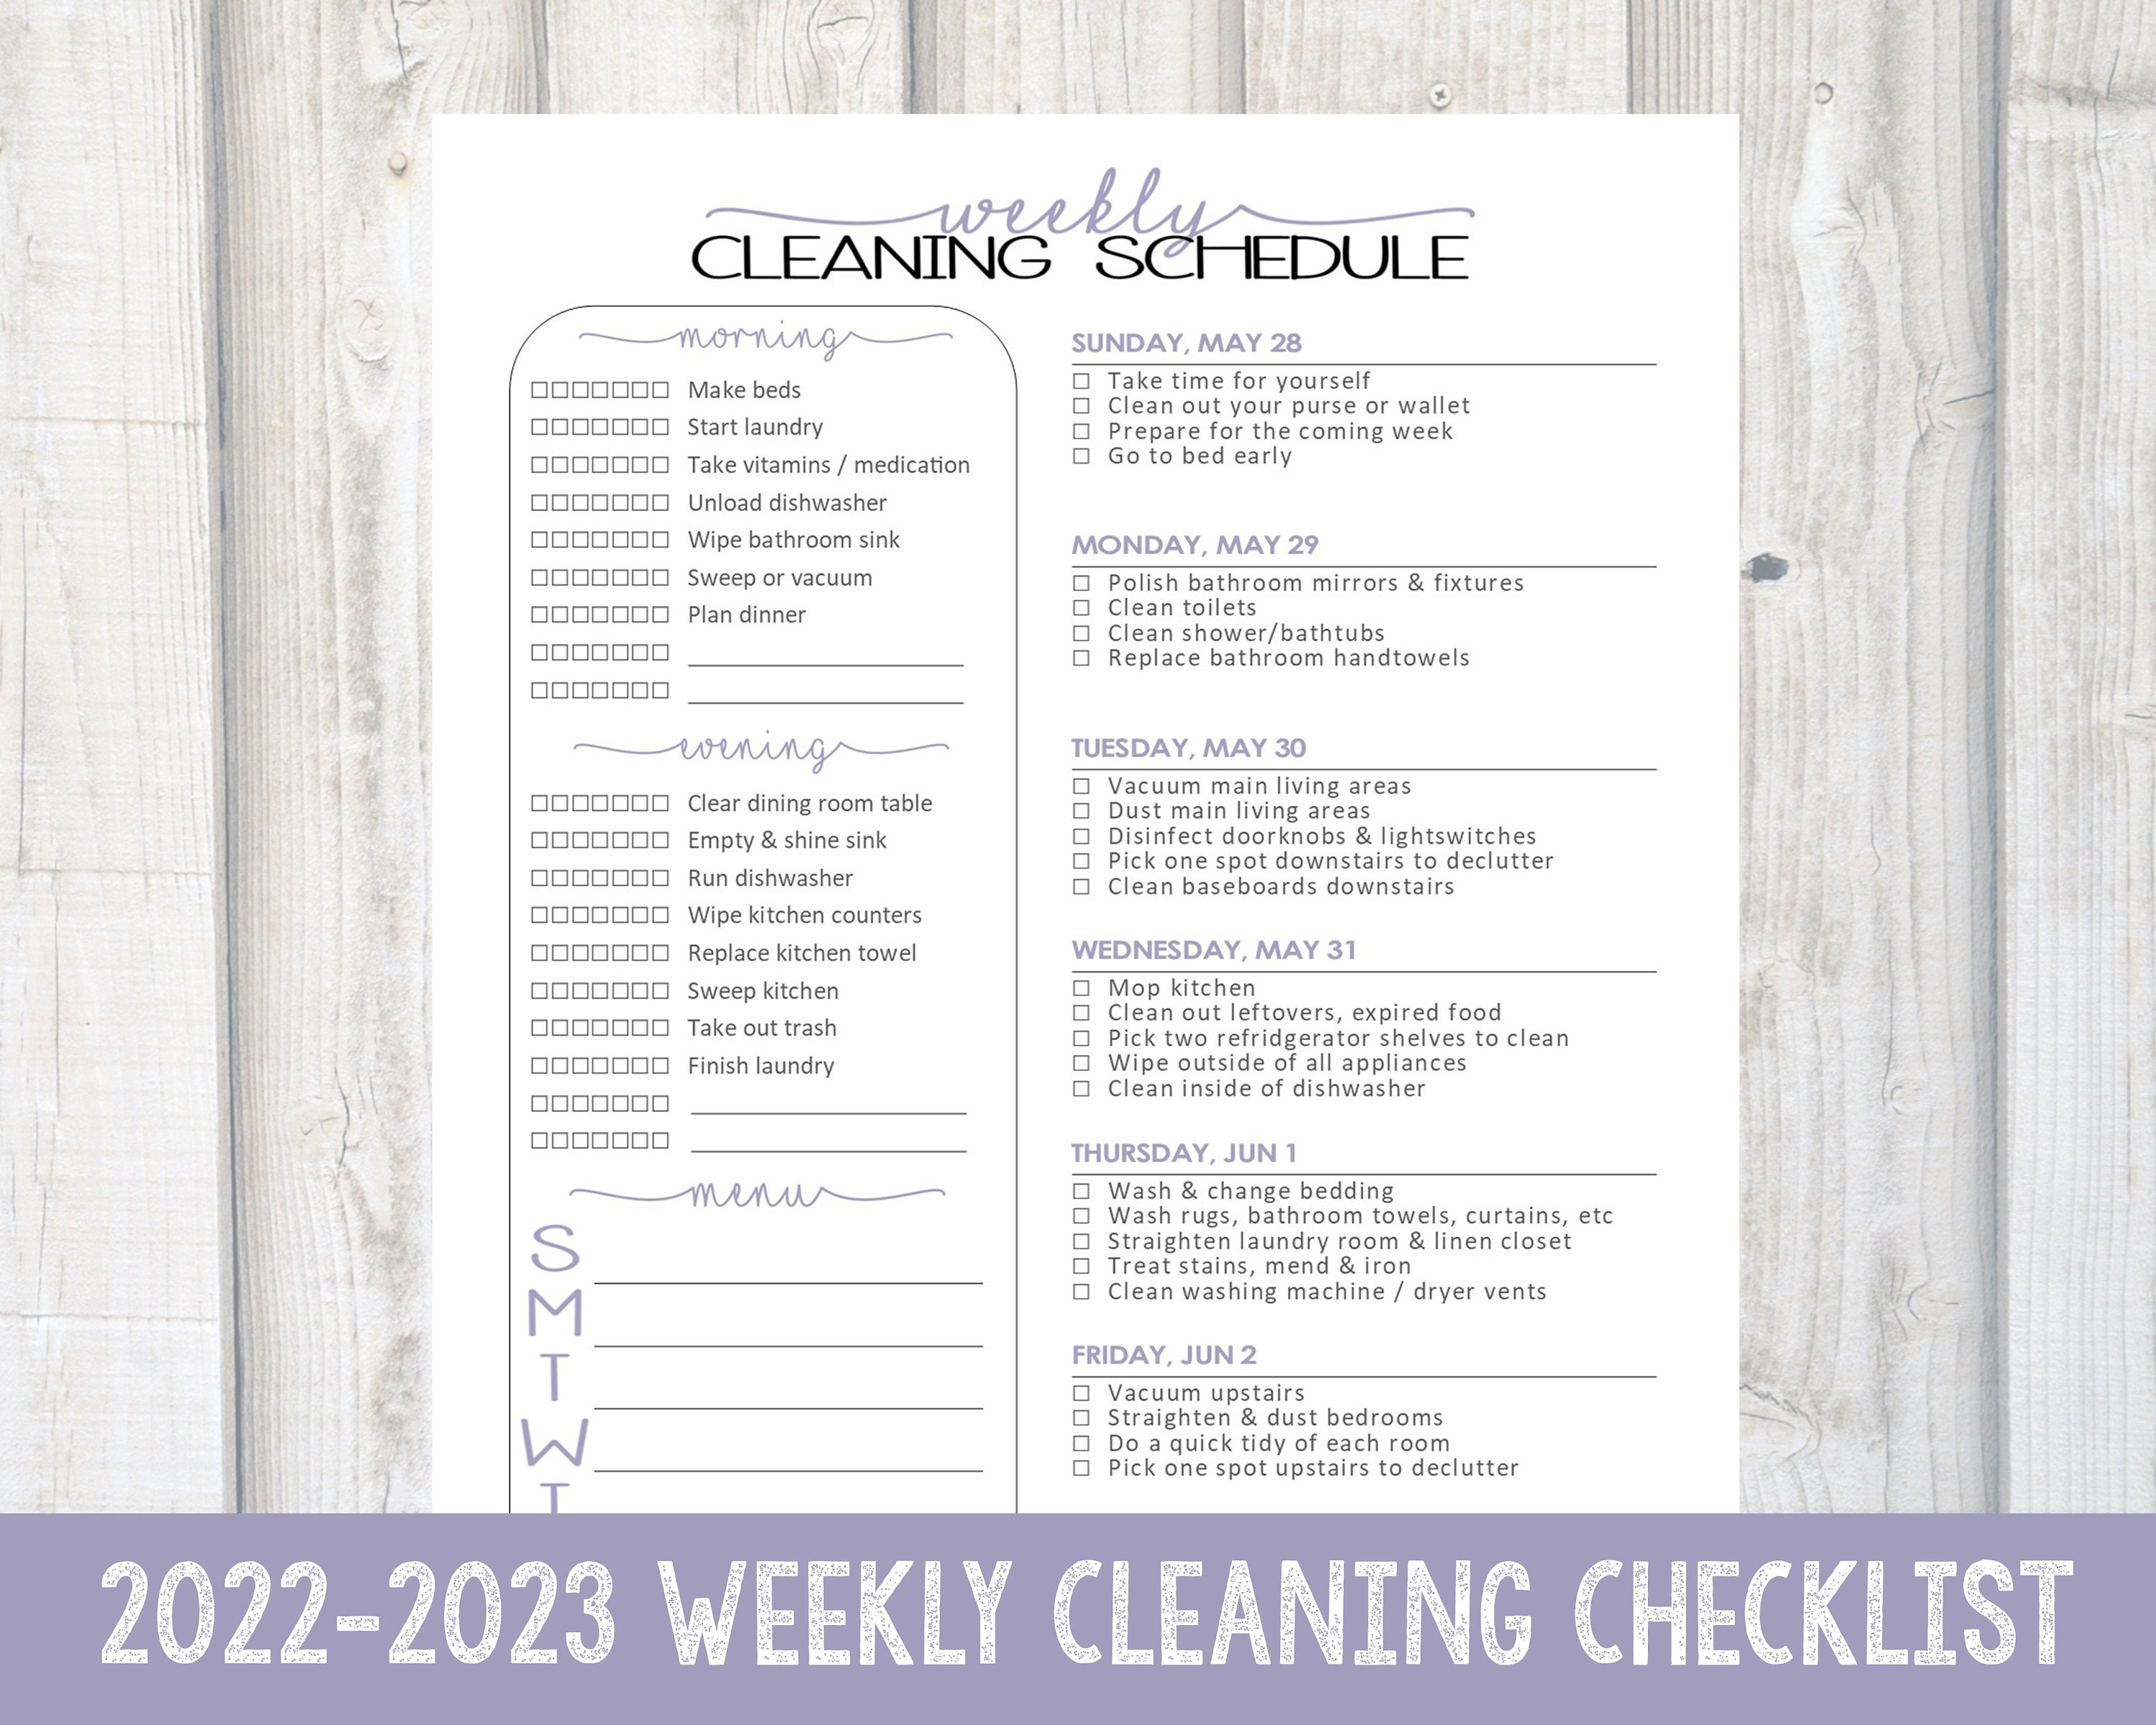 How to Make House Cleaning Schedule and Checklist